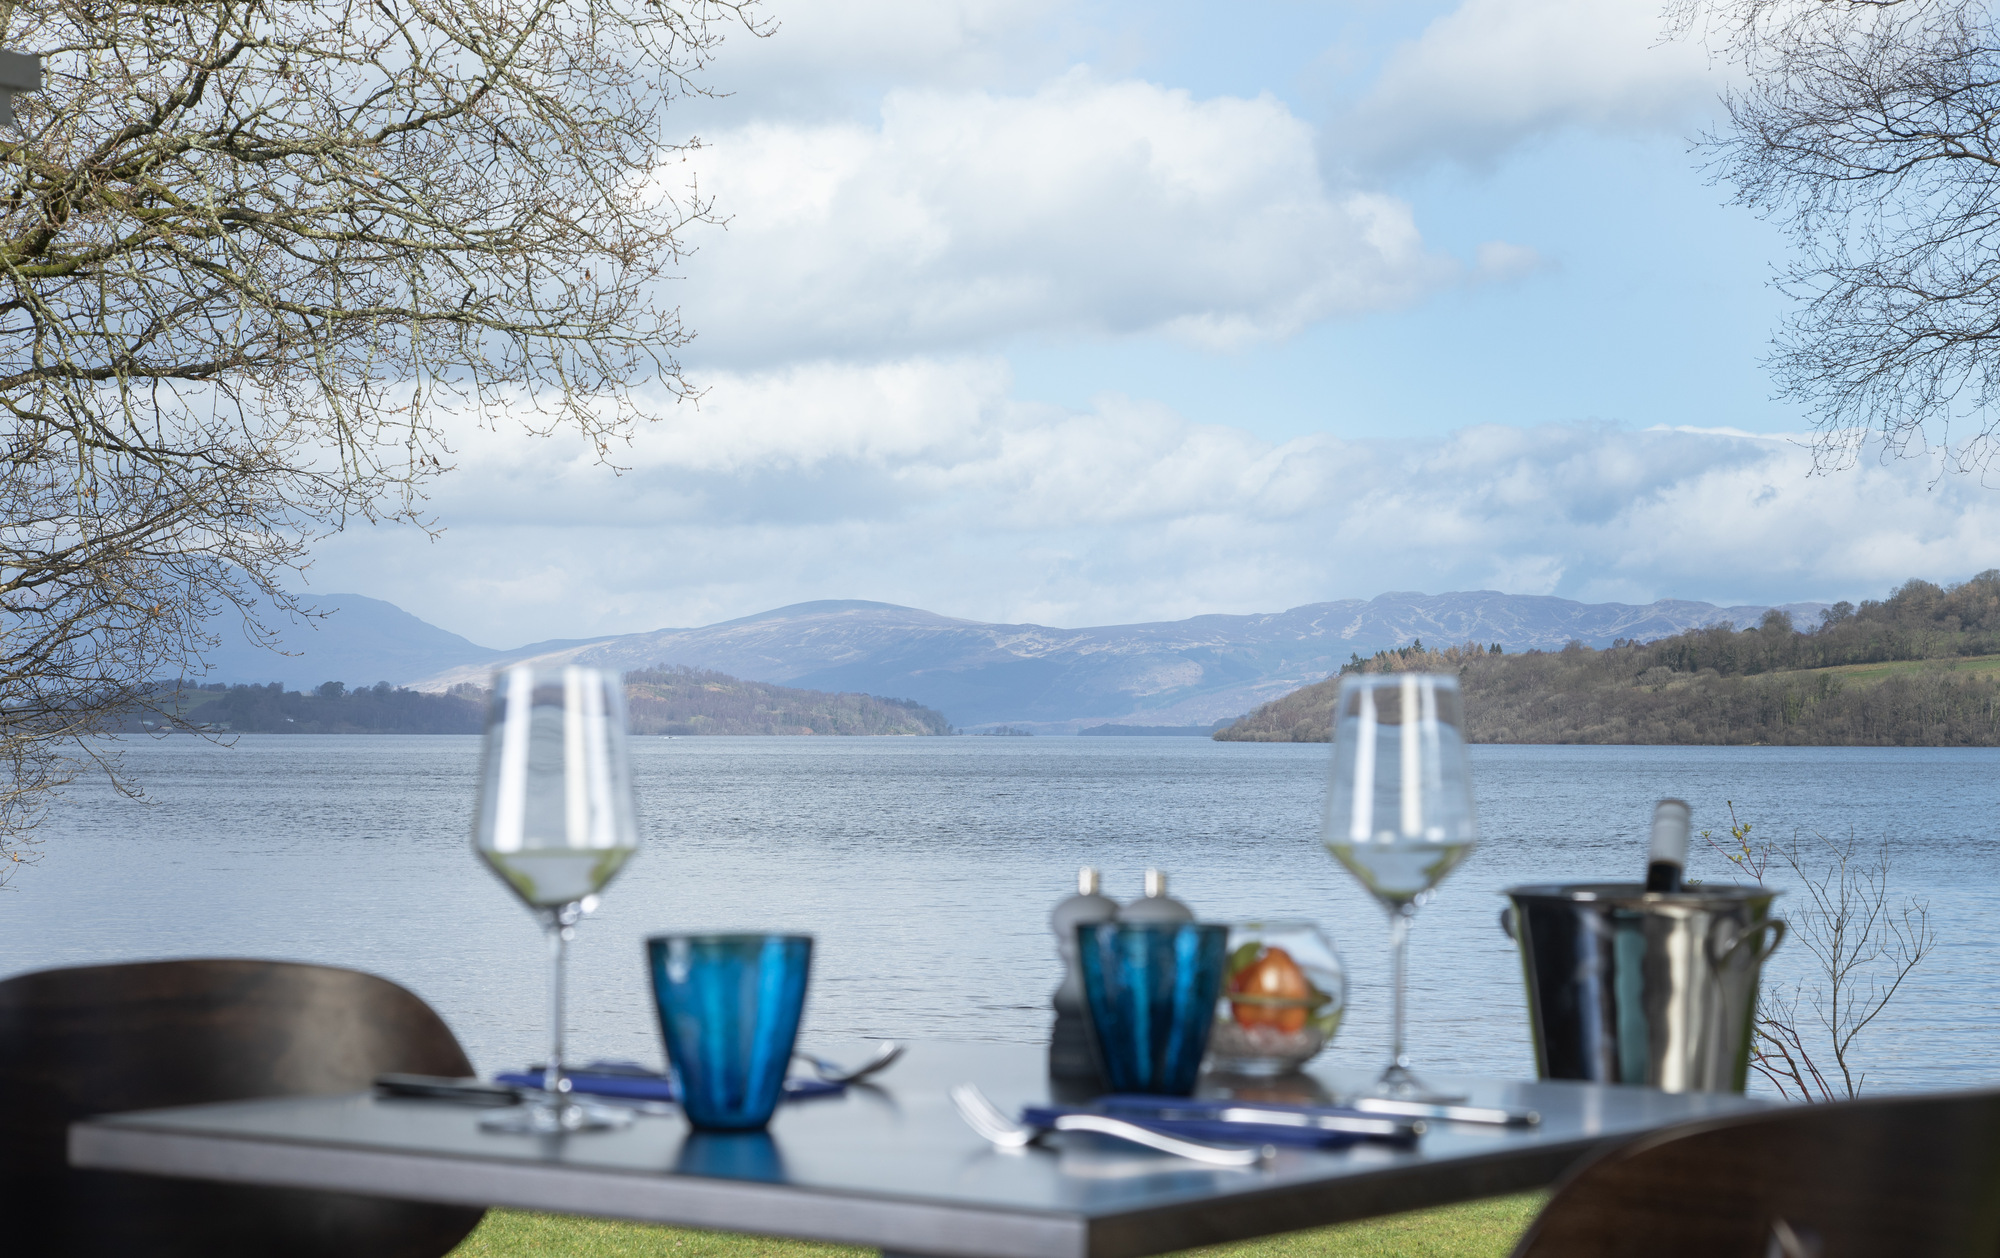 Dining table set with two glasses and a plate at La Vista restaurant by Loch Lomond.